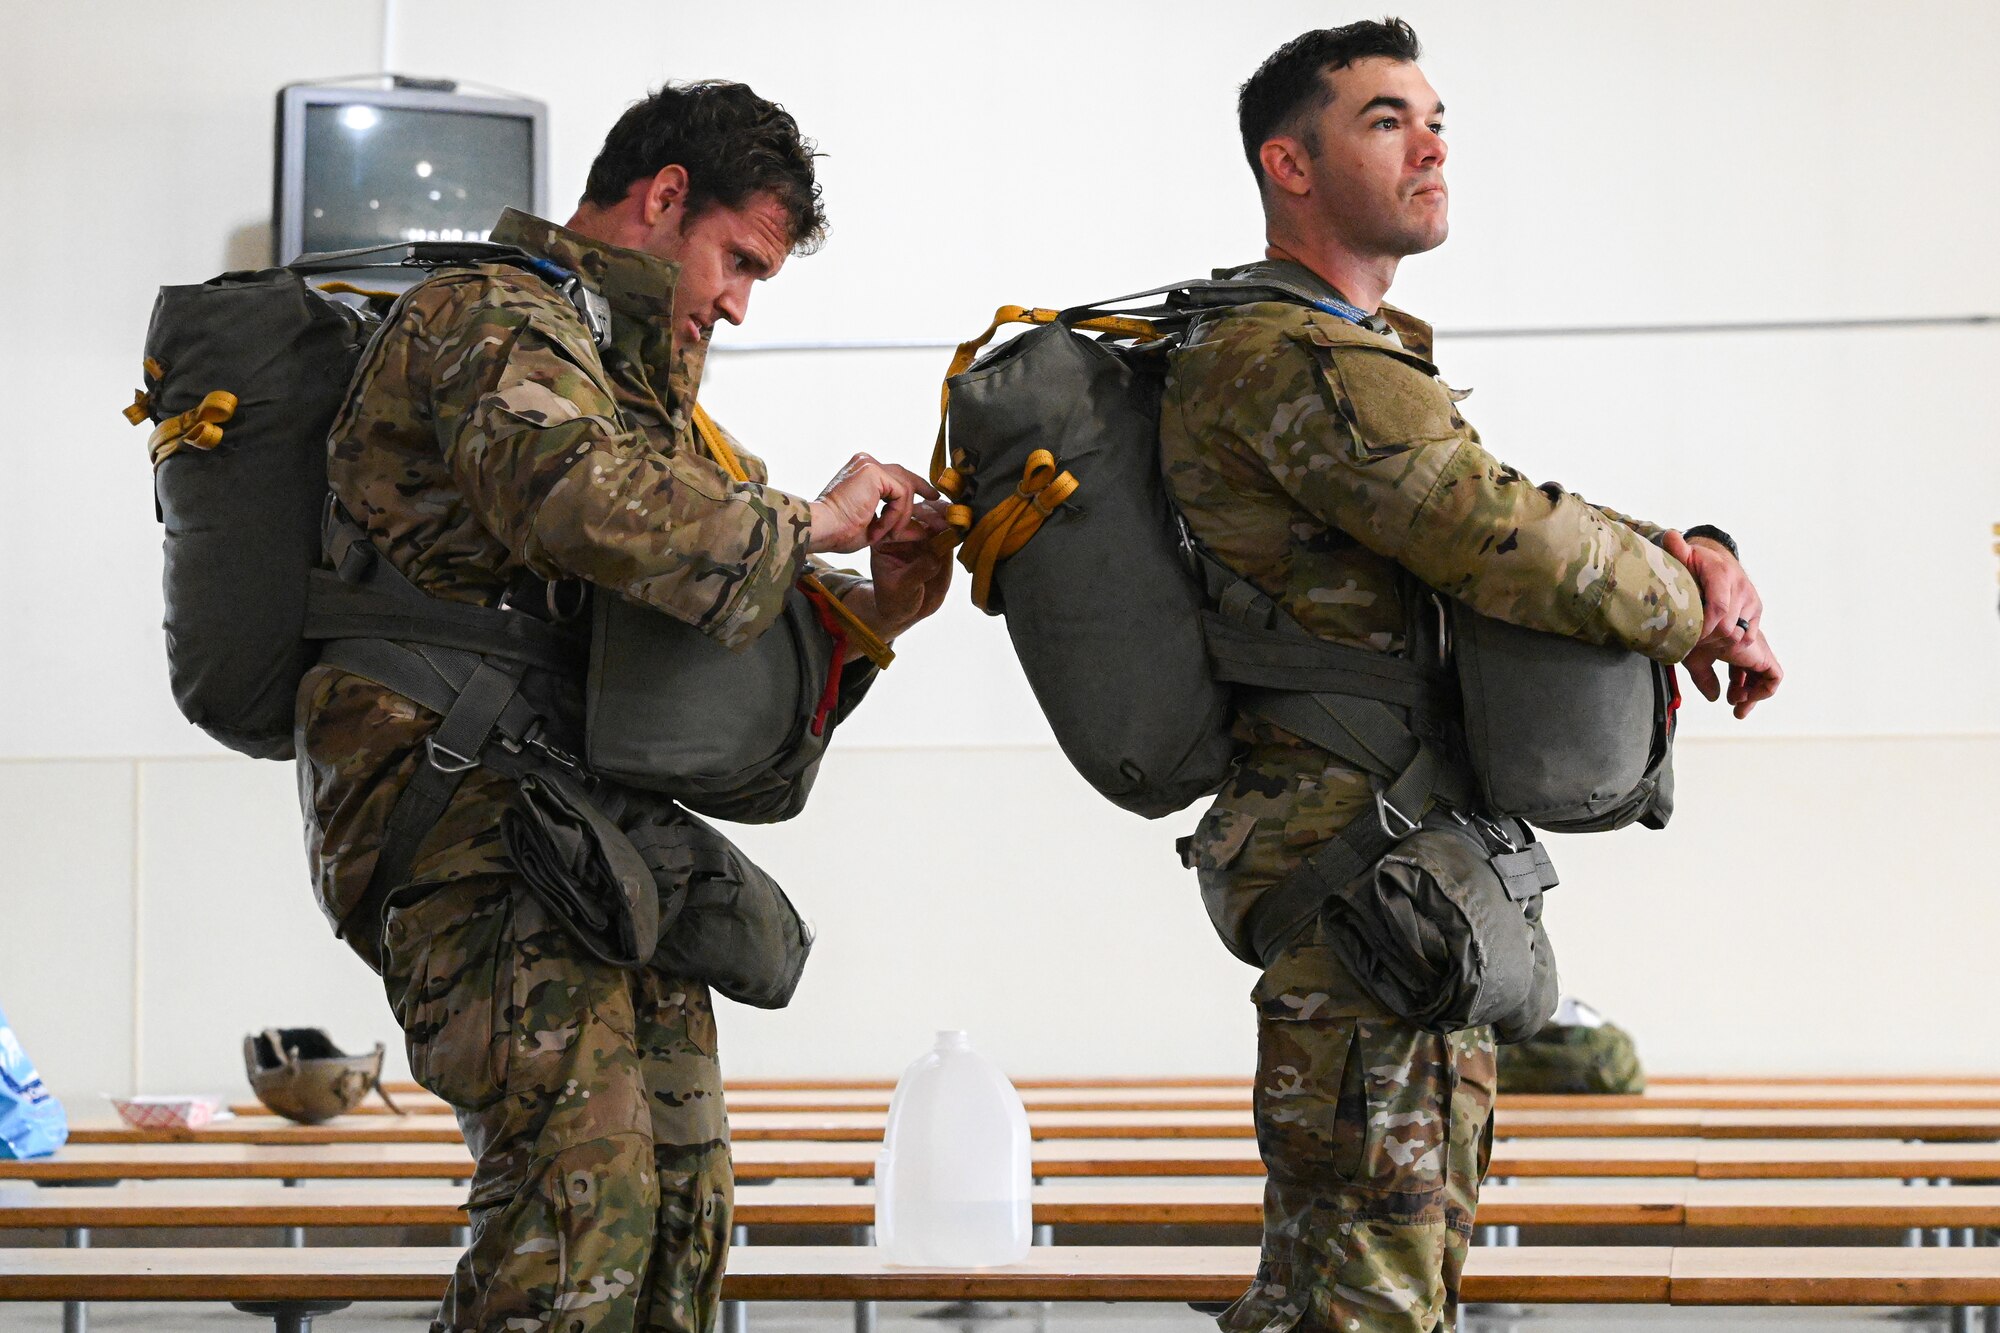 Paratroopers get their equipment ready before boarding on a plane.